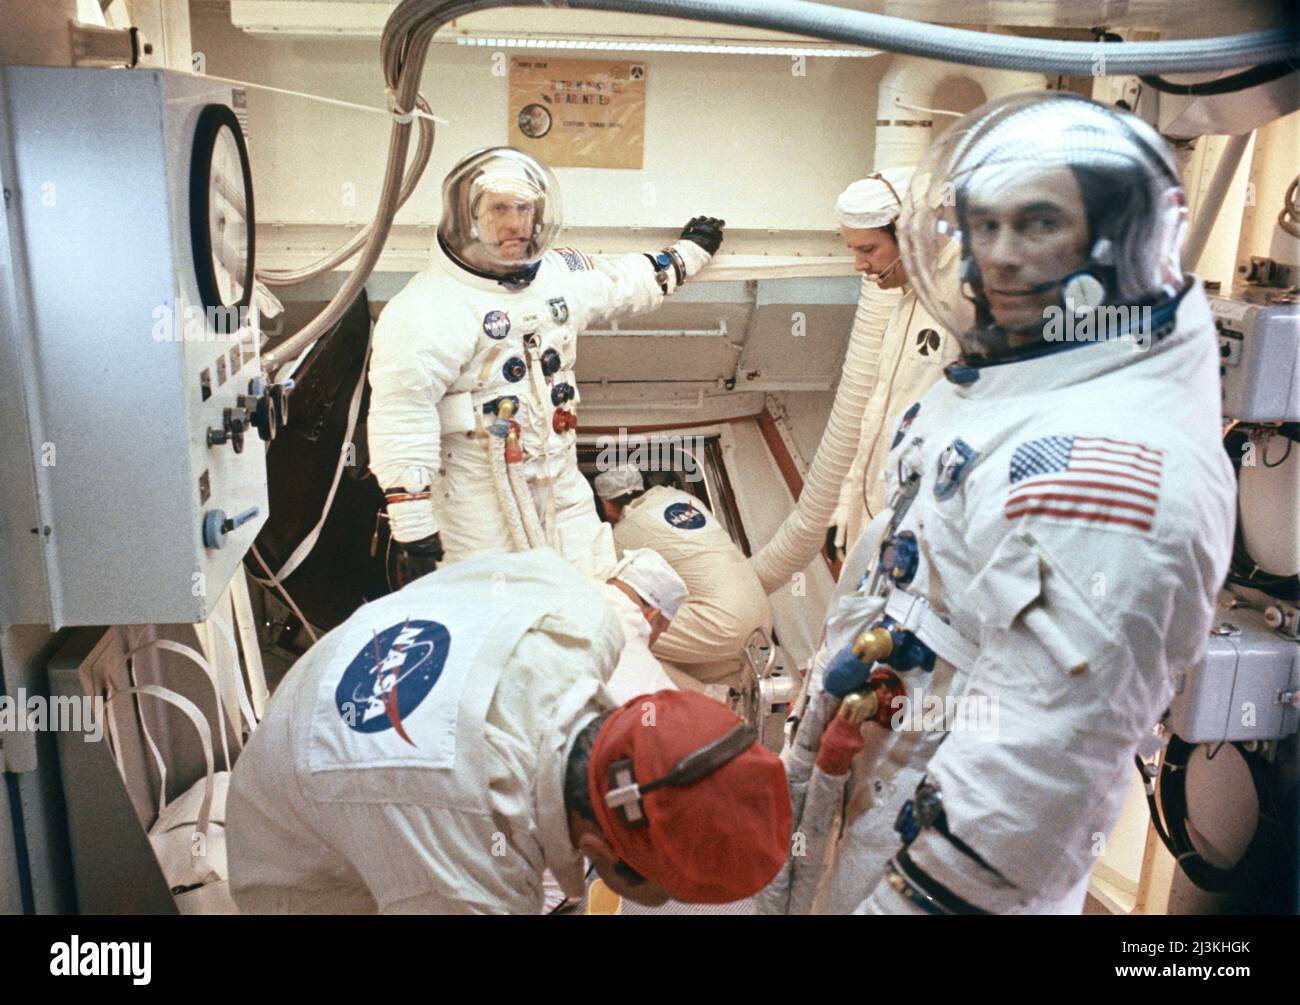 Interior view of the White Room at Pad B, Launch Complex 39, Kennedy Space Center, showing preparations being made for insertion of the Apollo 10 crew into their spacecraft during the prelaunch countdown. In the background is astronaut Thomas Stafford, commander. Astronaut Eugene Cernan, lunar module pilot, is in right foreground. Stock Photo